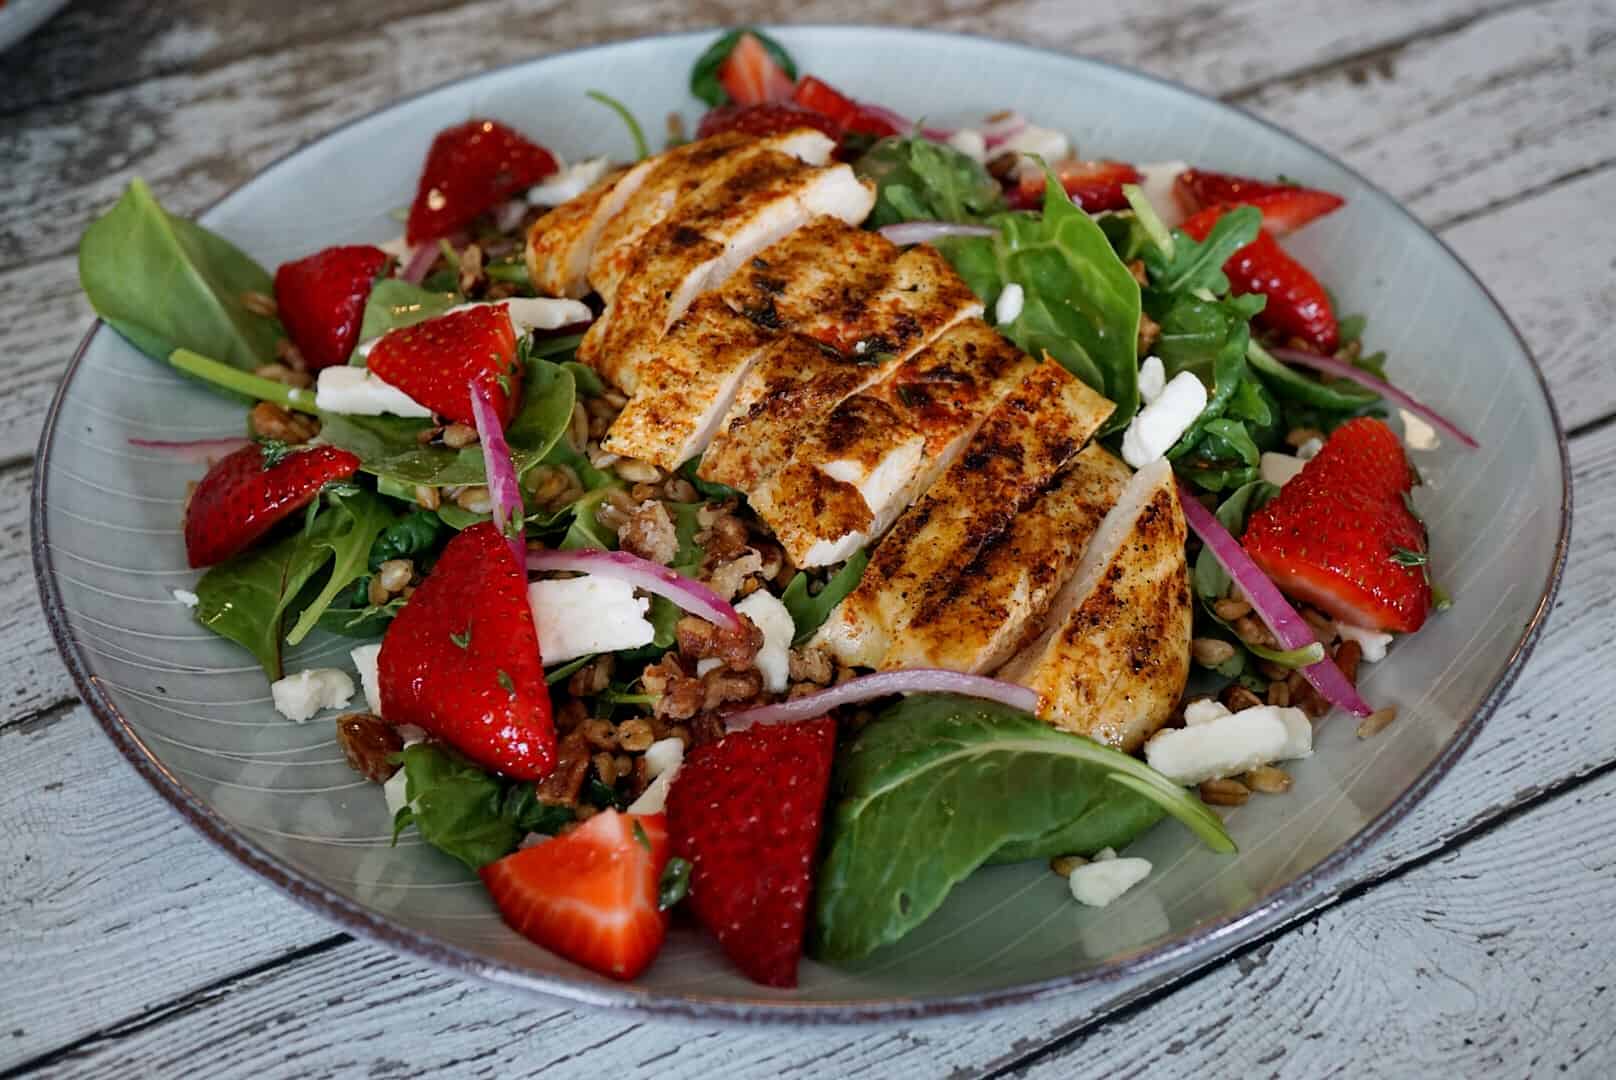 This Toasted Farro Salad with Blackened Chicken will totally change your view on salads. It's quick and easy to make and SO filling! It even makes delicious leftovers.